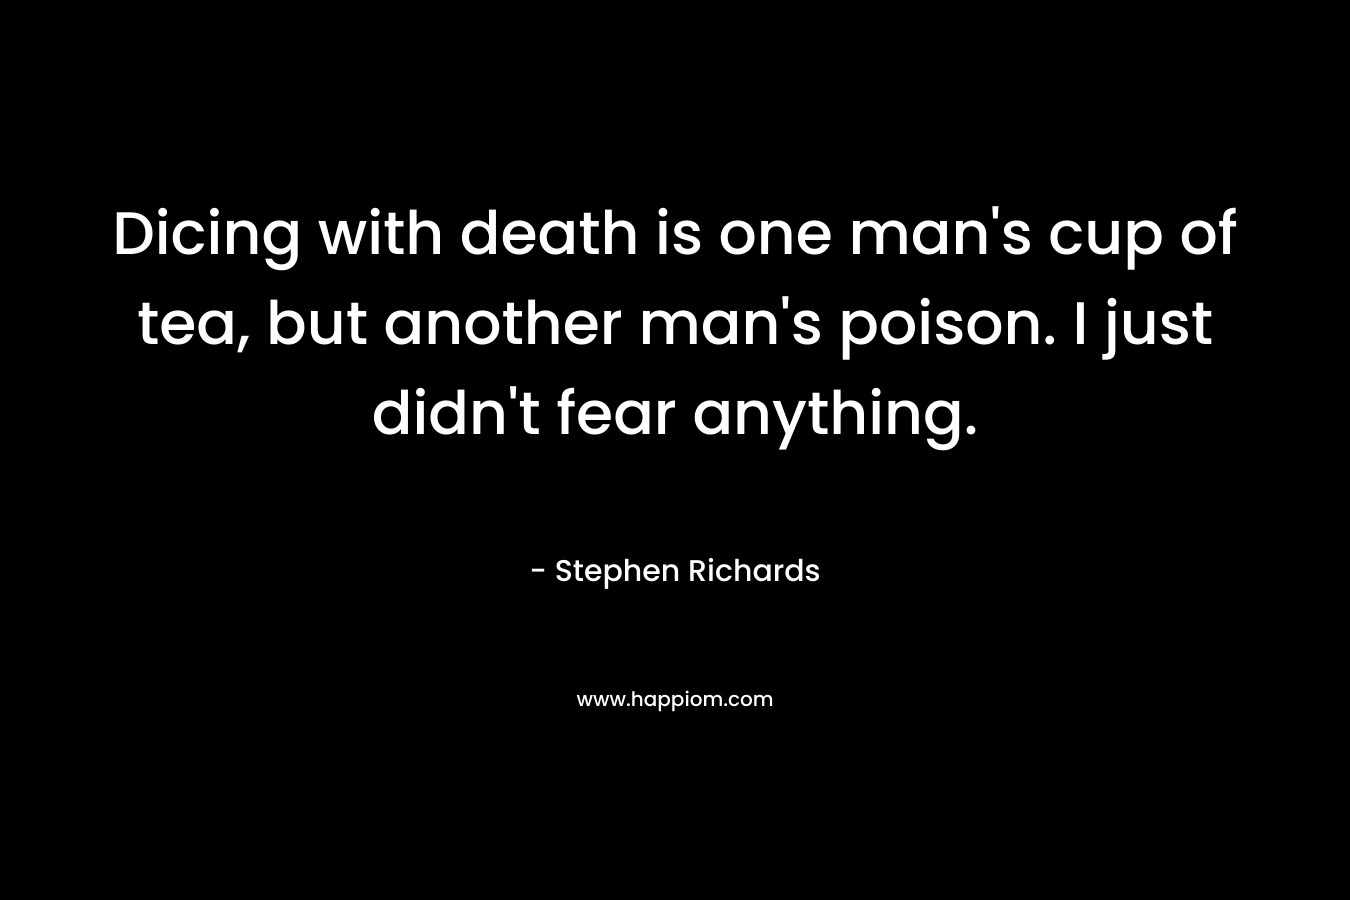 Dicing with death is one man's cup of tea, but another man's poison. I just didn't fear anything.